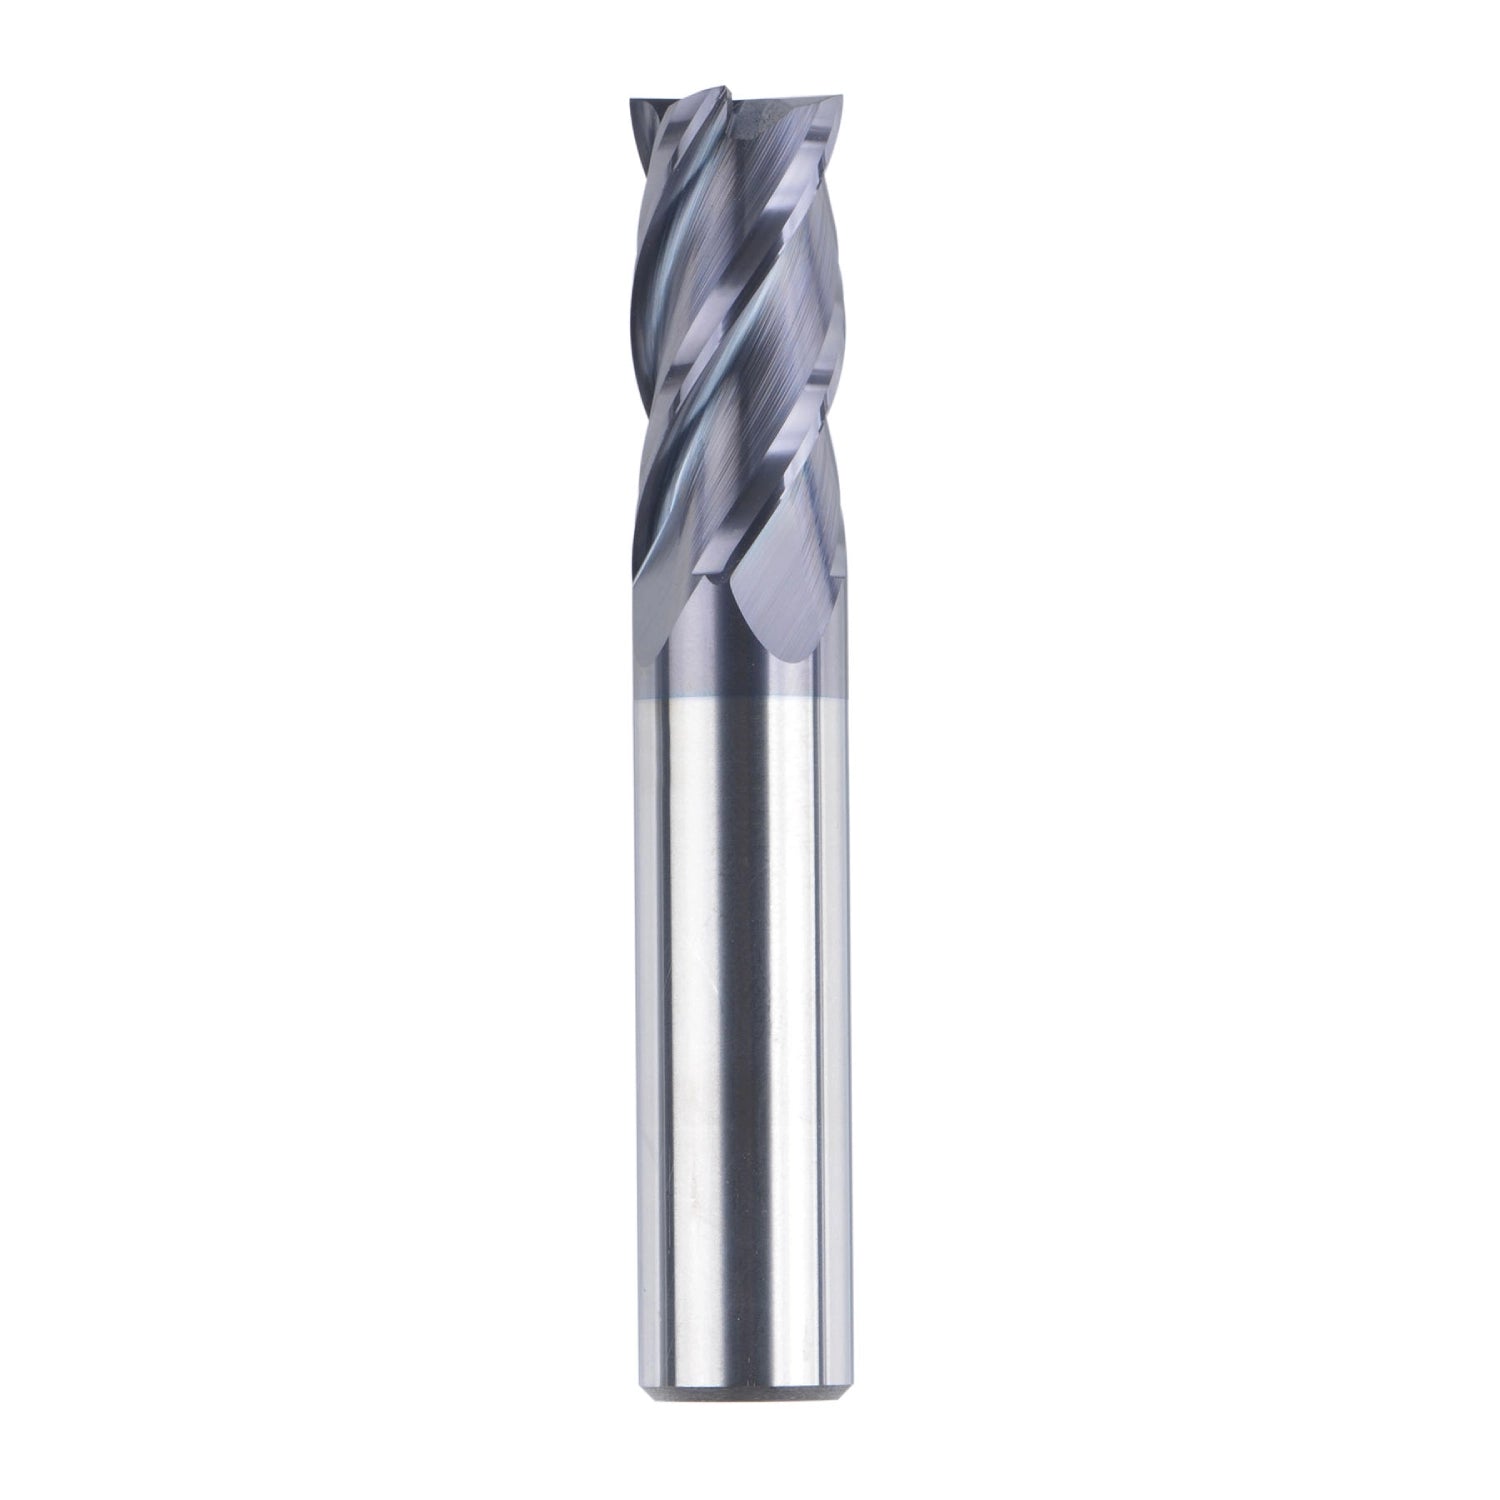 SpeTool 4 Flute 1/2" SHK 3" Long Carbide End Mill Router Bit TiAlN Coated